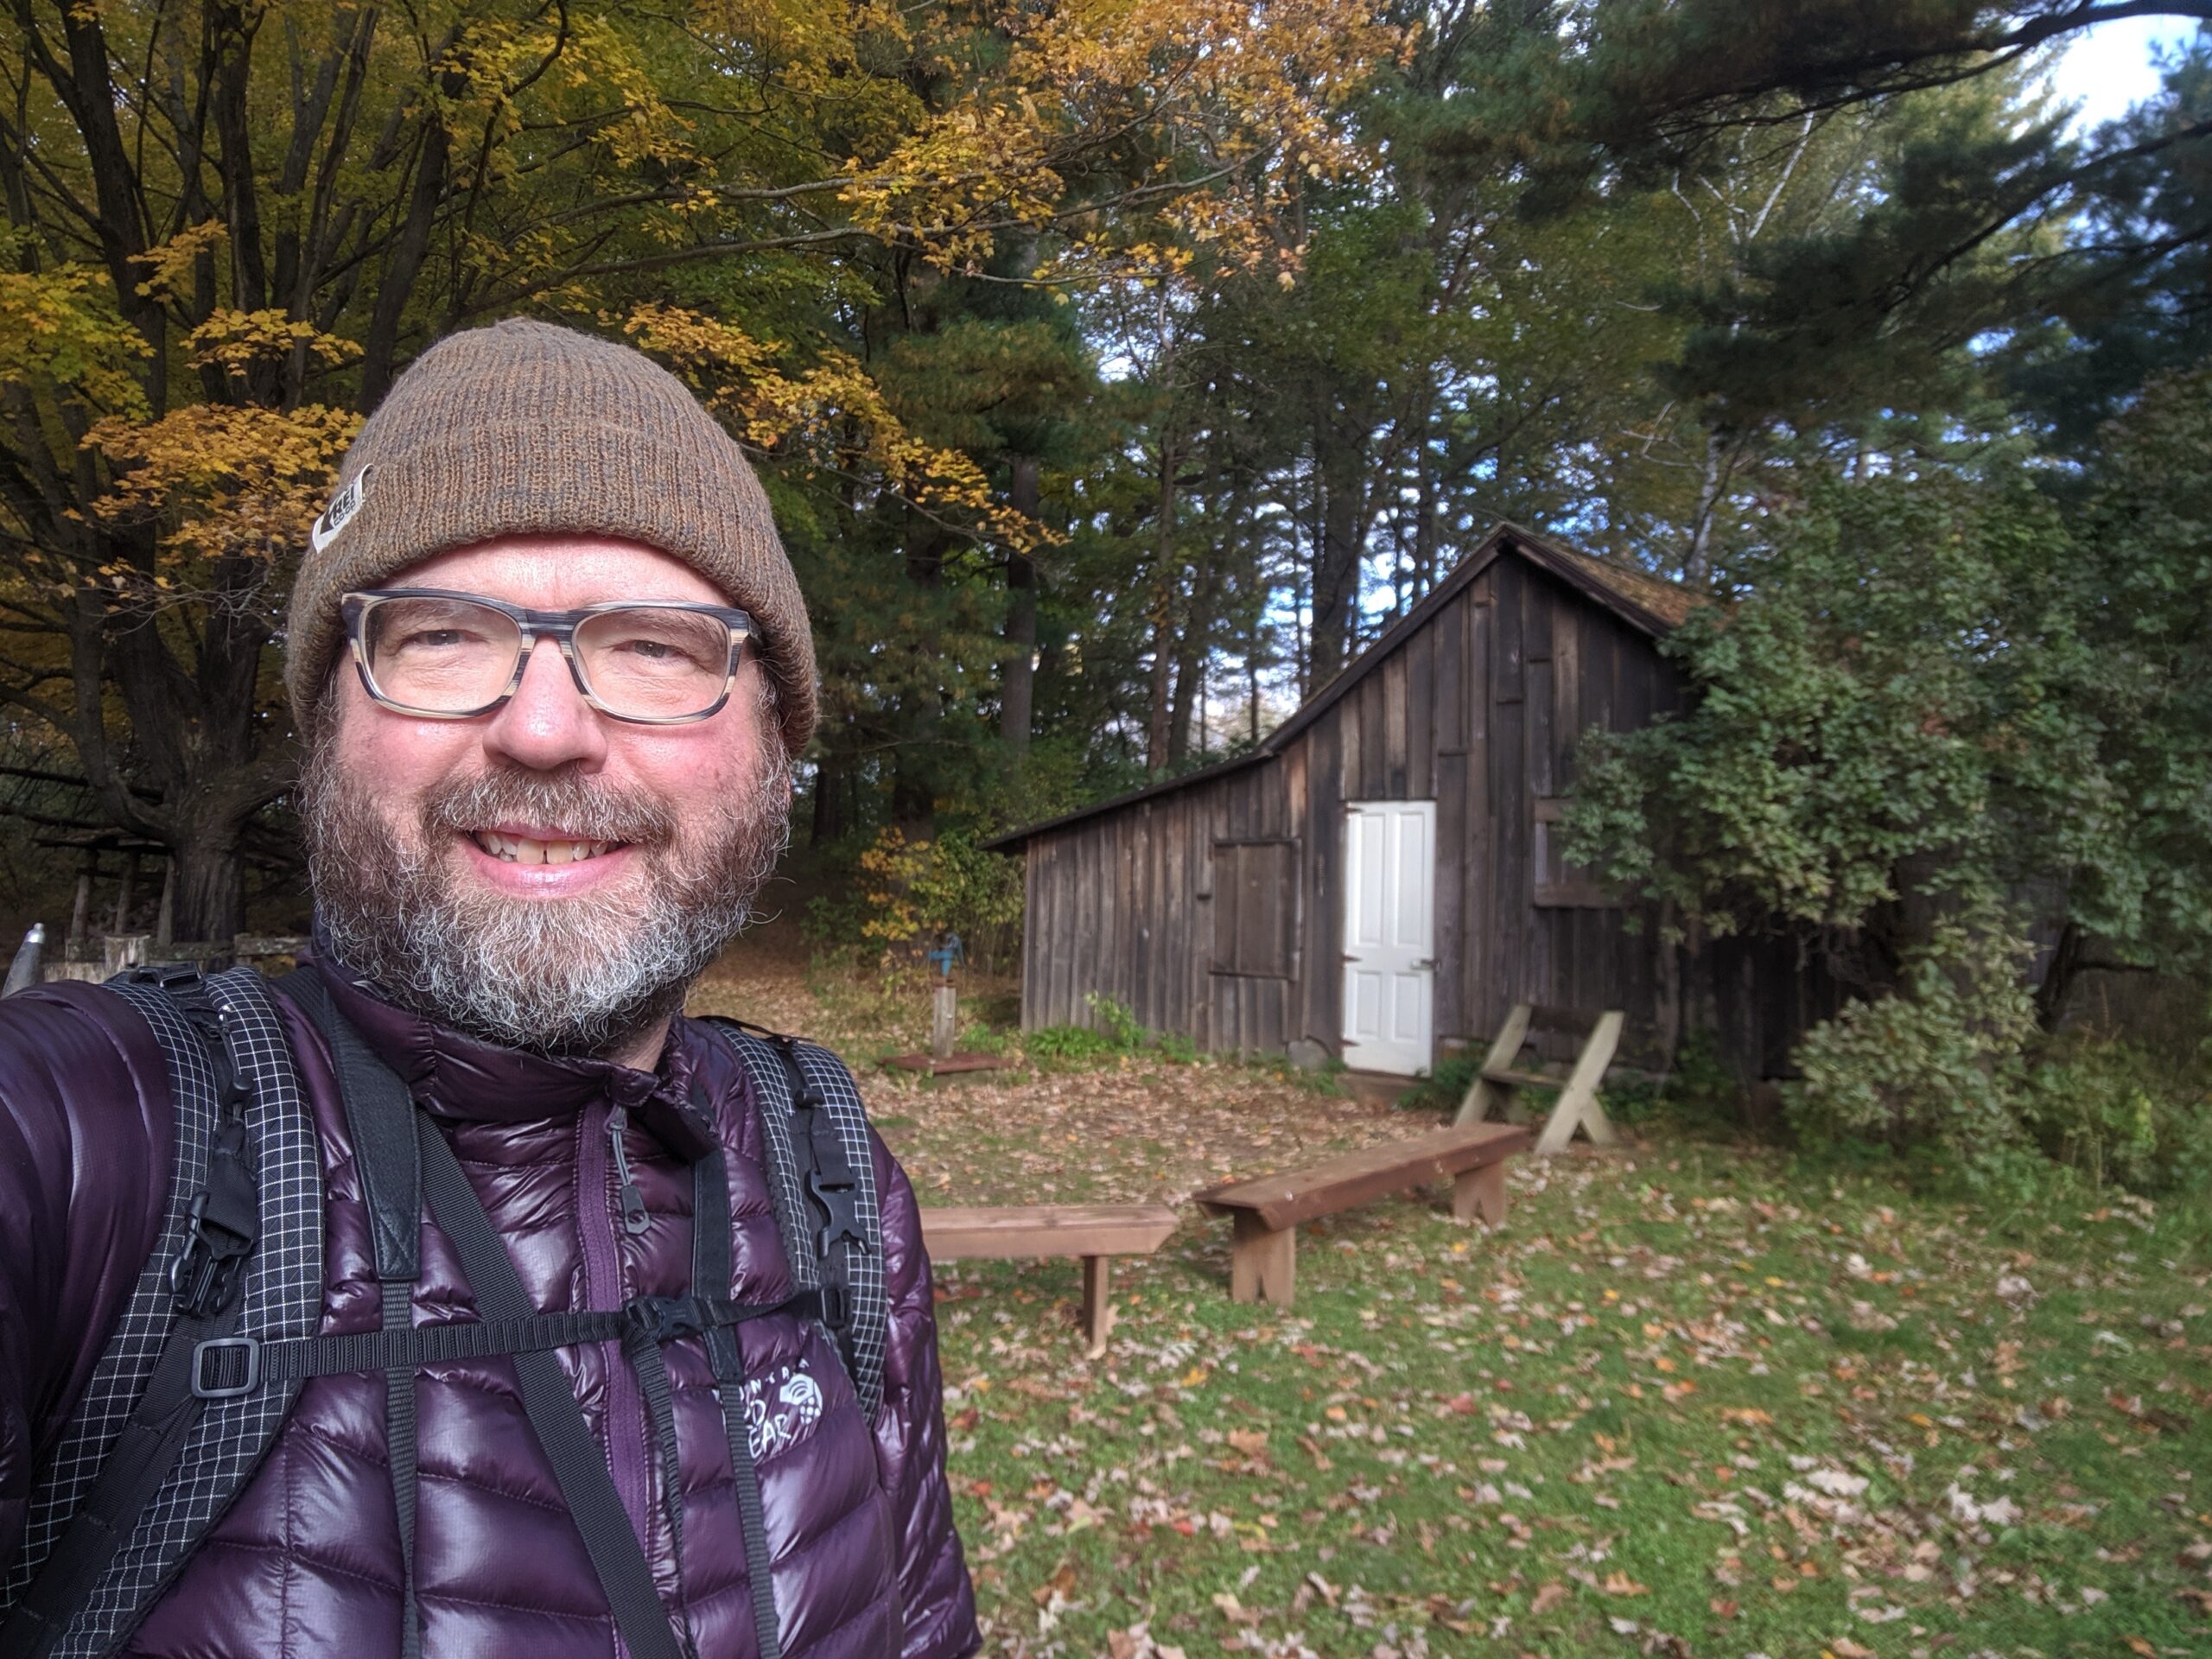 Cameron Gillie takes a selfie at Aldo Leopold's Shack, located between Baraboo and Portage